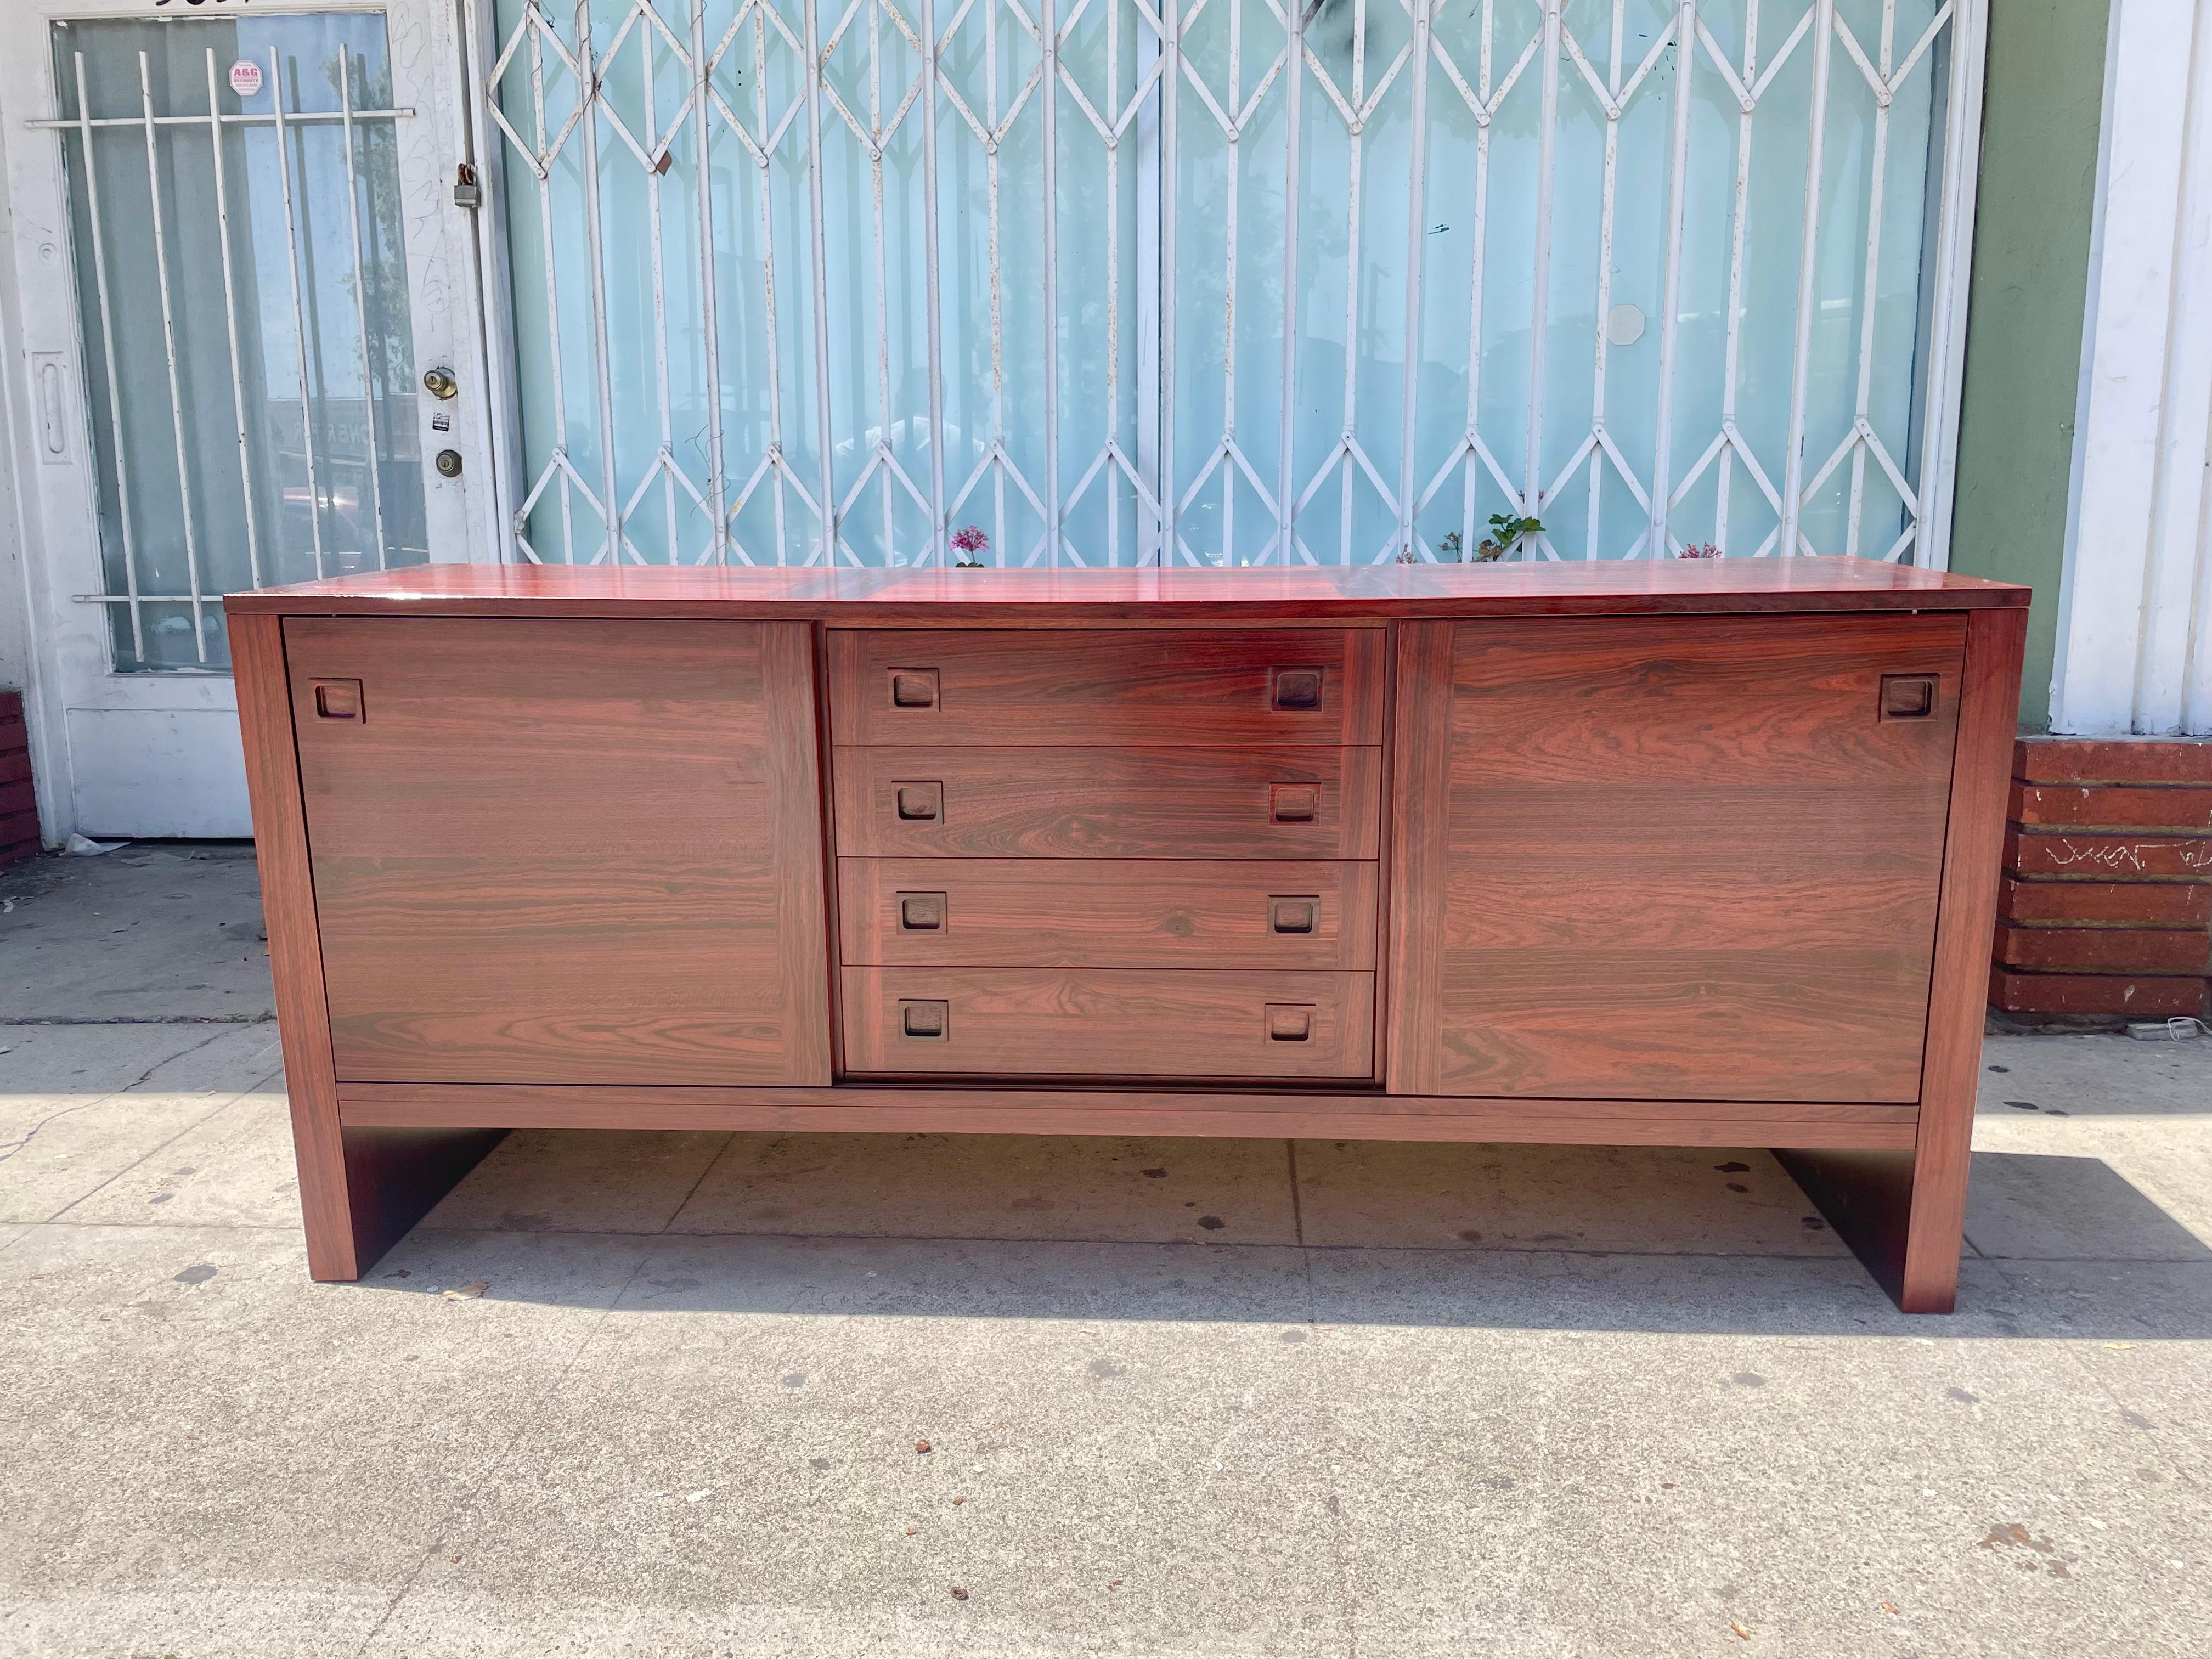 Danish modern Rosewood credenza this beautiful credenza can be used as a cabinet or dresser. It features a beautiful rosewood frame with four drawers in the middle and one shelf on each side covered with slide doors, making it easy to move it from